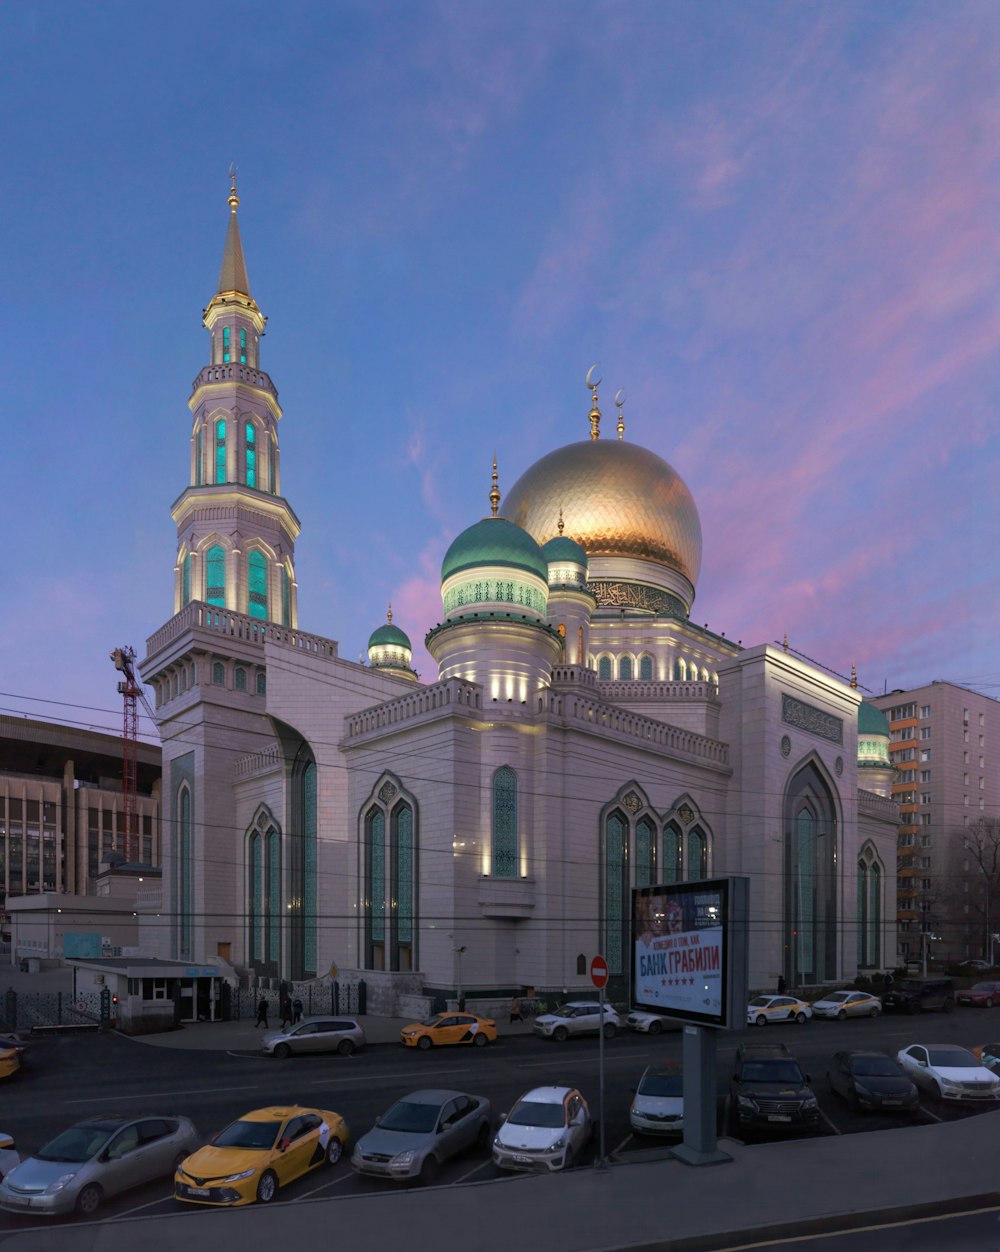 a large building with a dome and towers